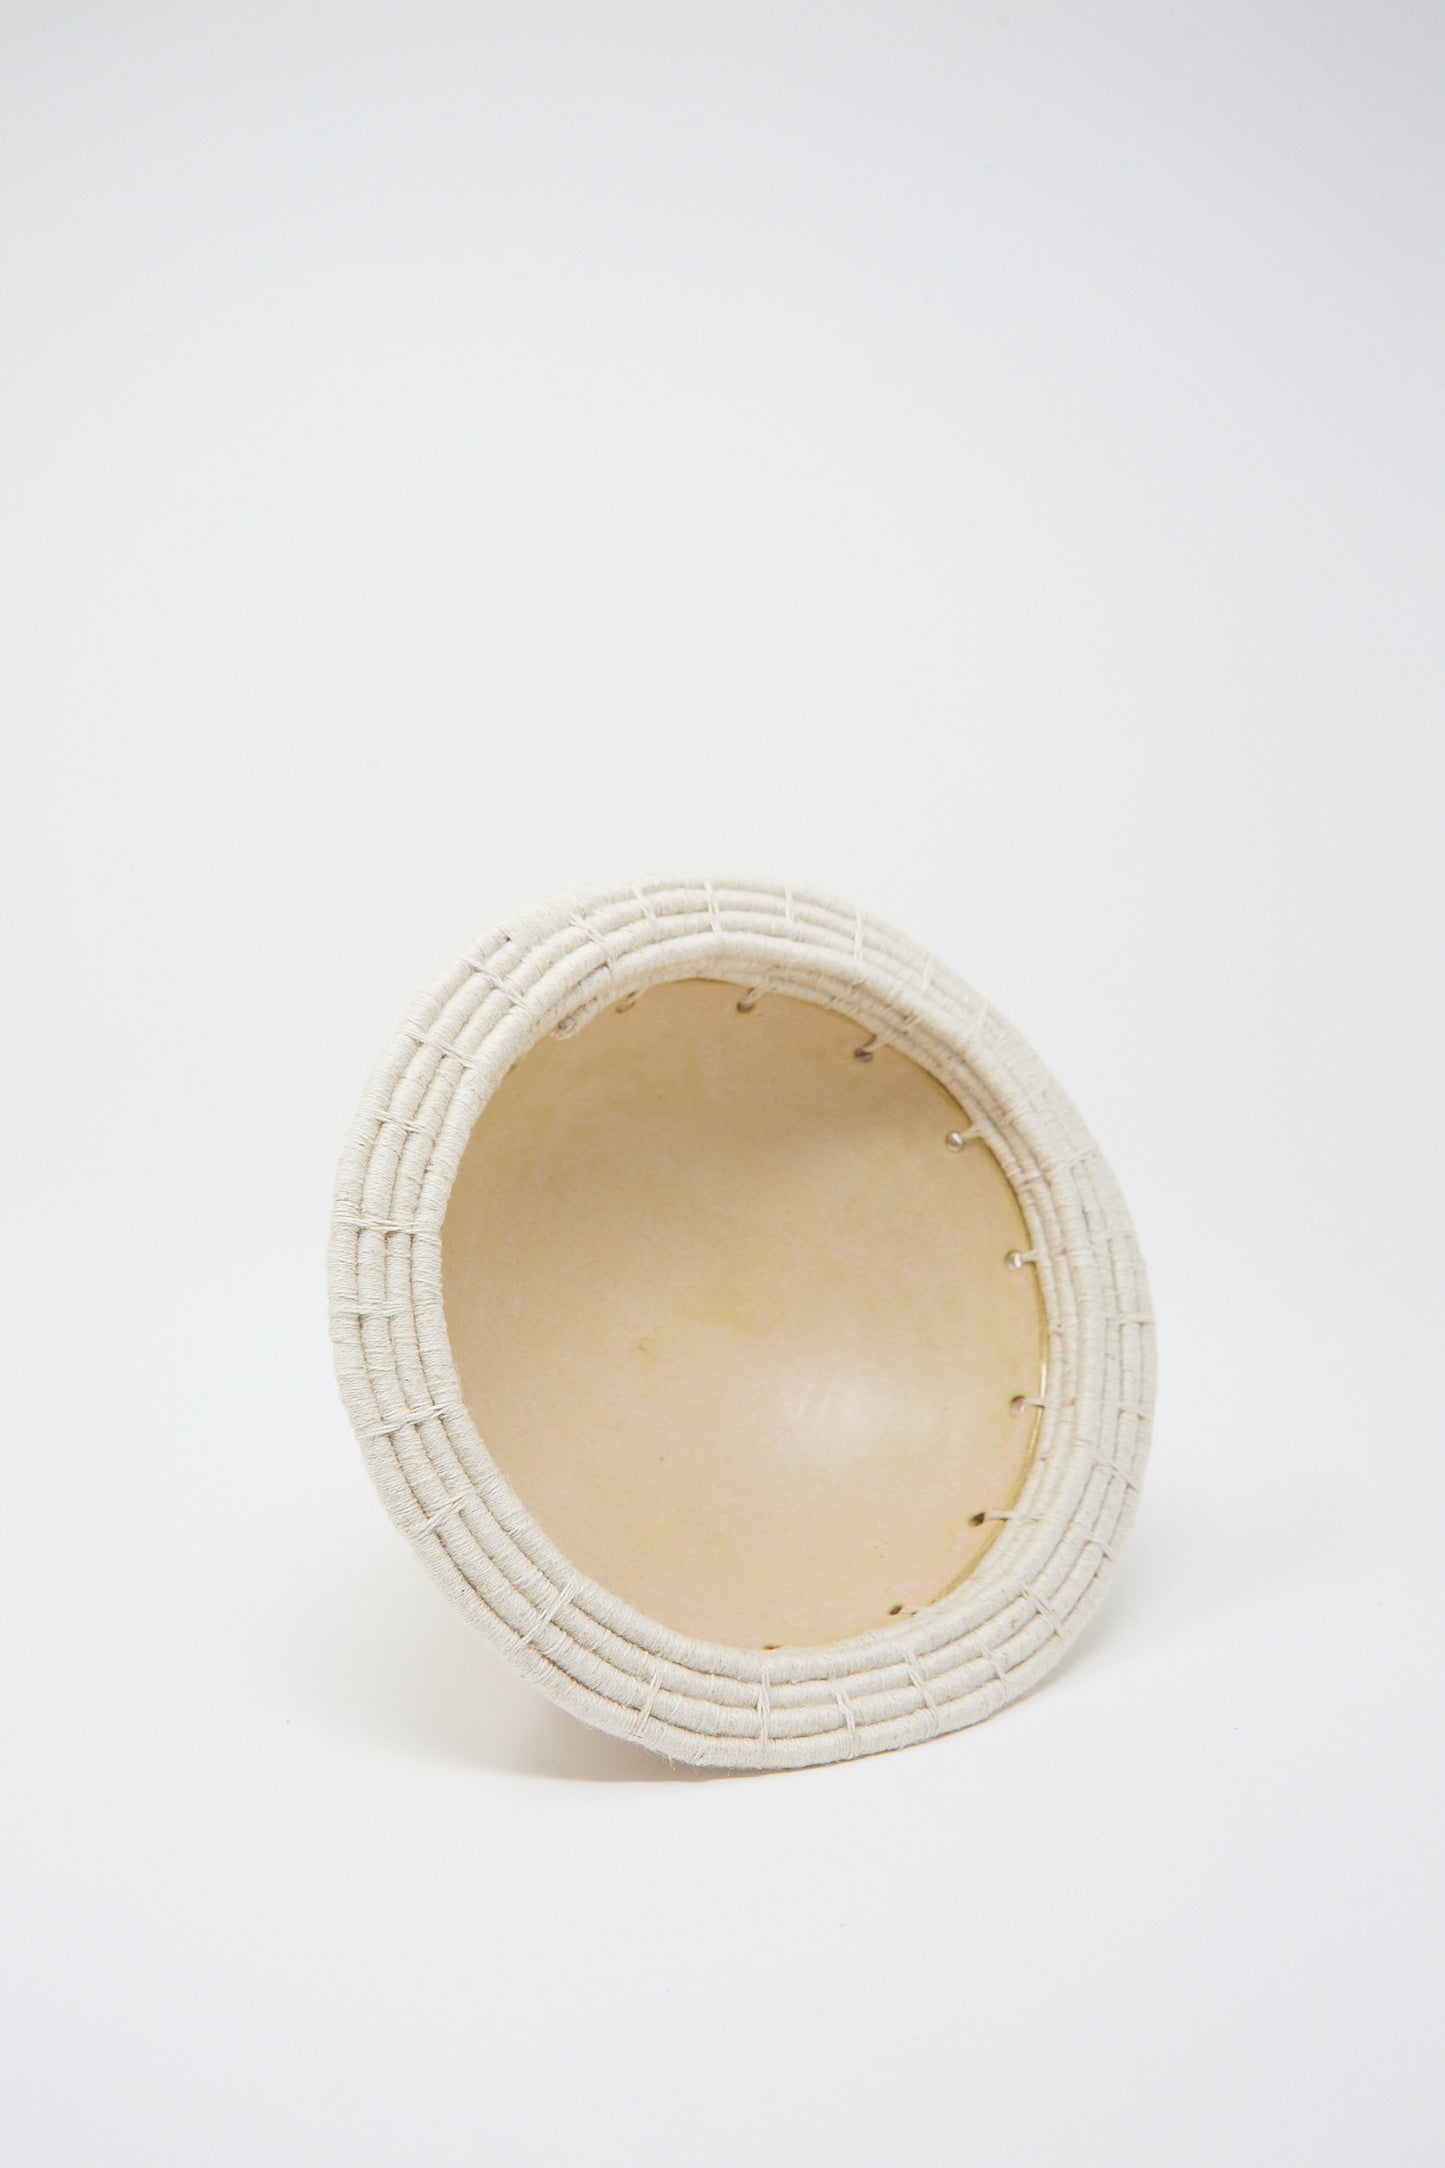 A Decorative Bowl #805 in Tan by Karen Tinney, viewed from the side against a white background, crafted from California stoneware.